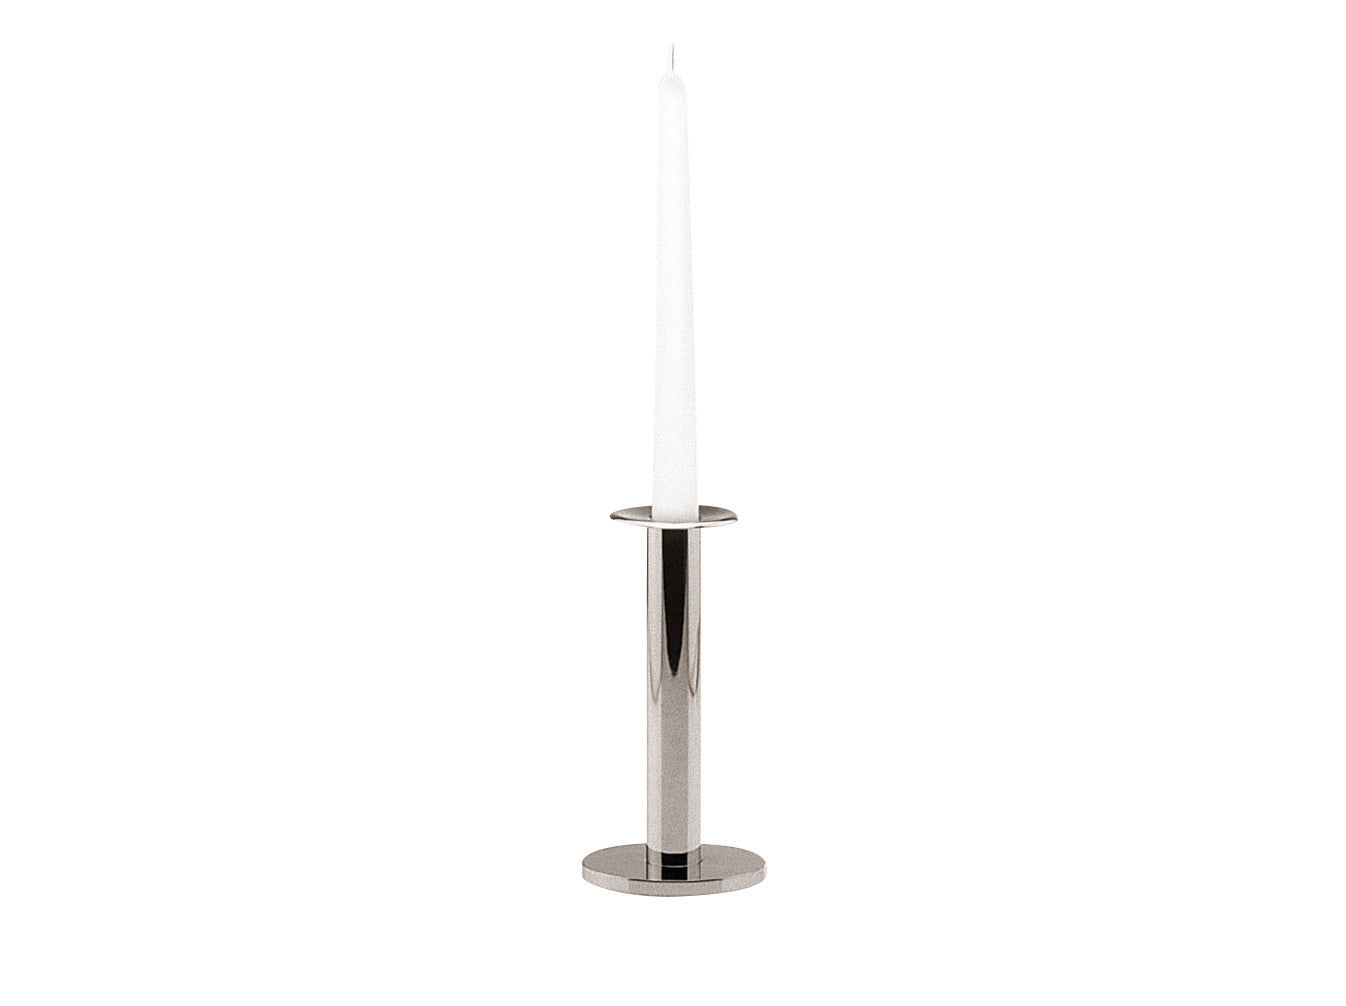 Candelabra for 1 candle, silverplated 18 cm